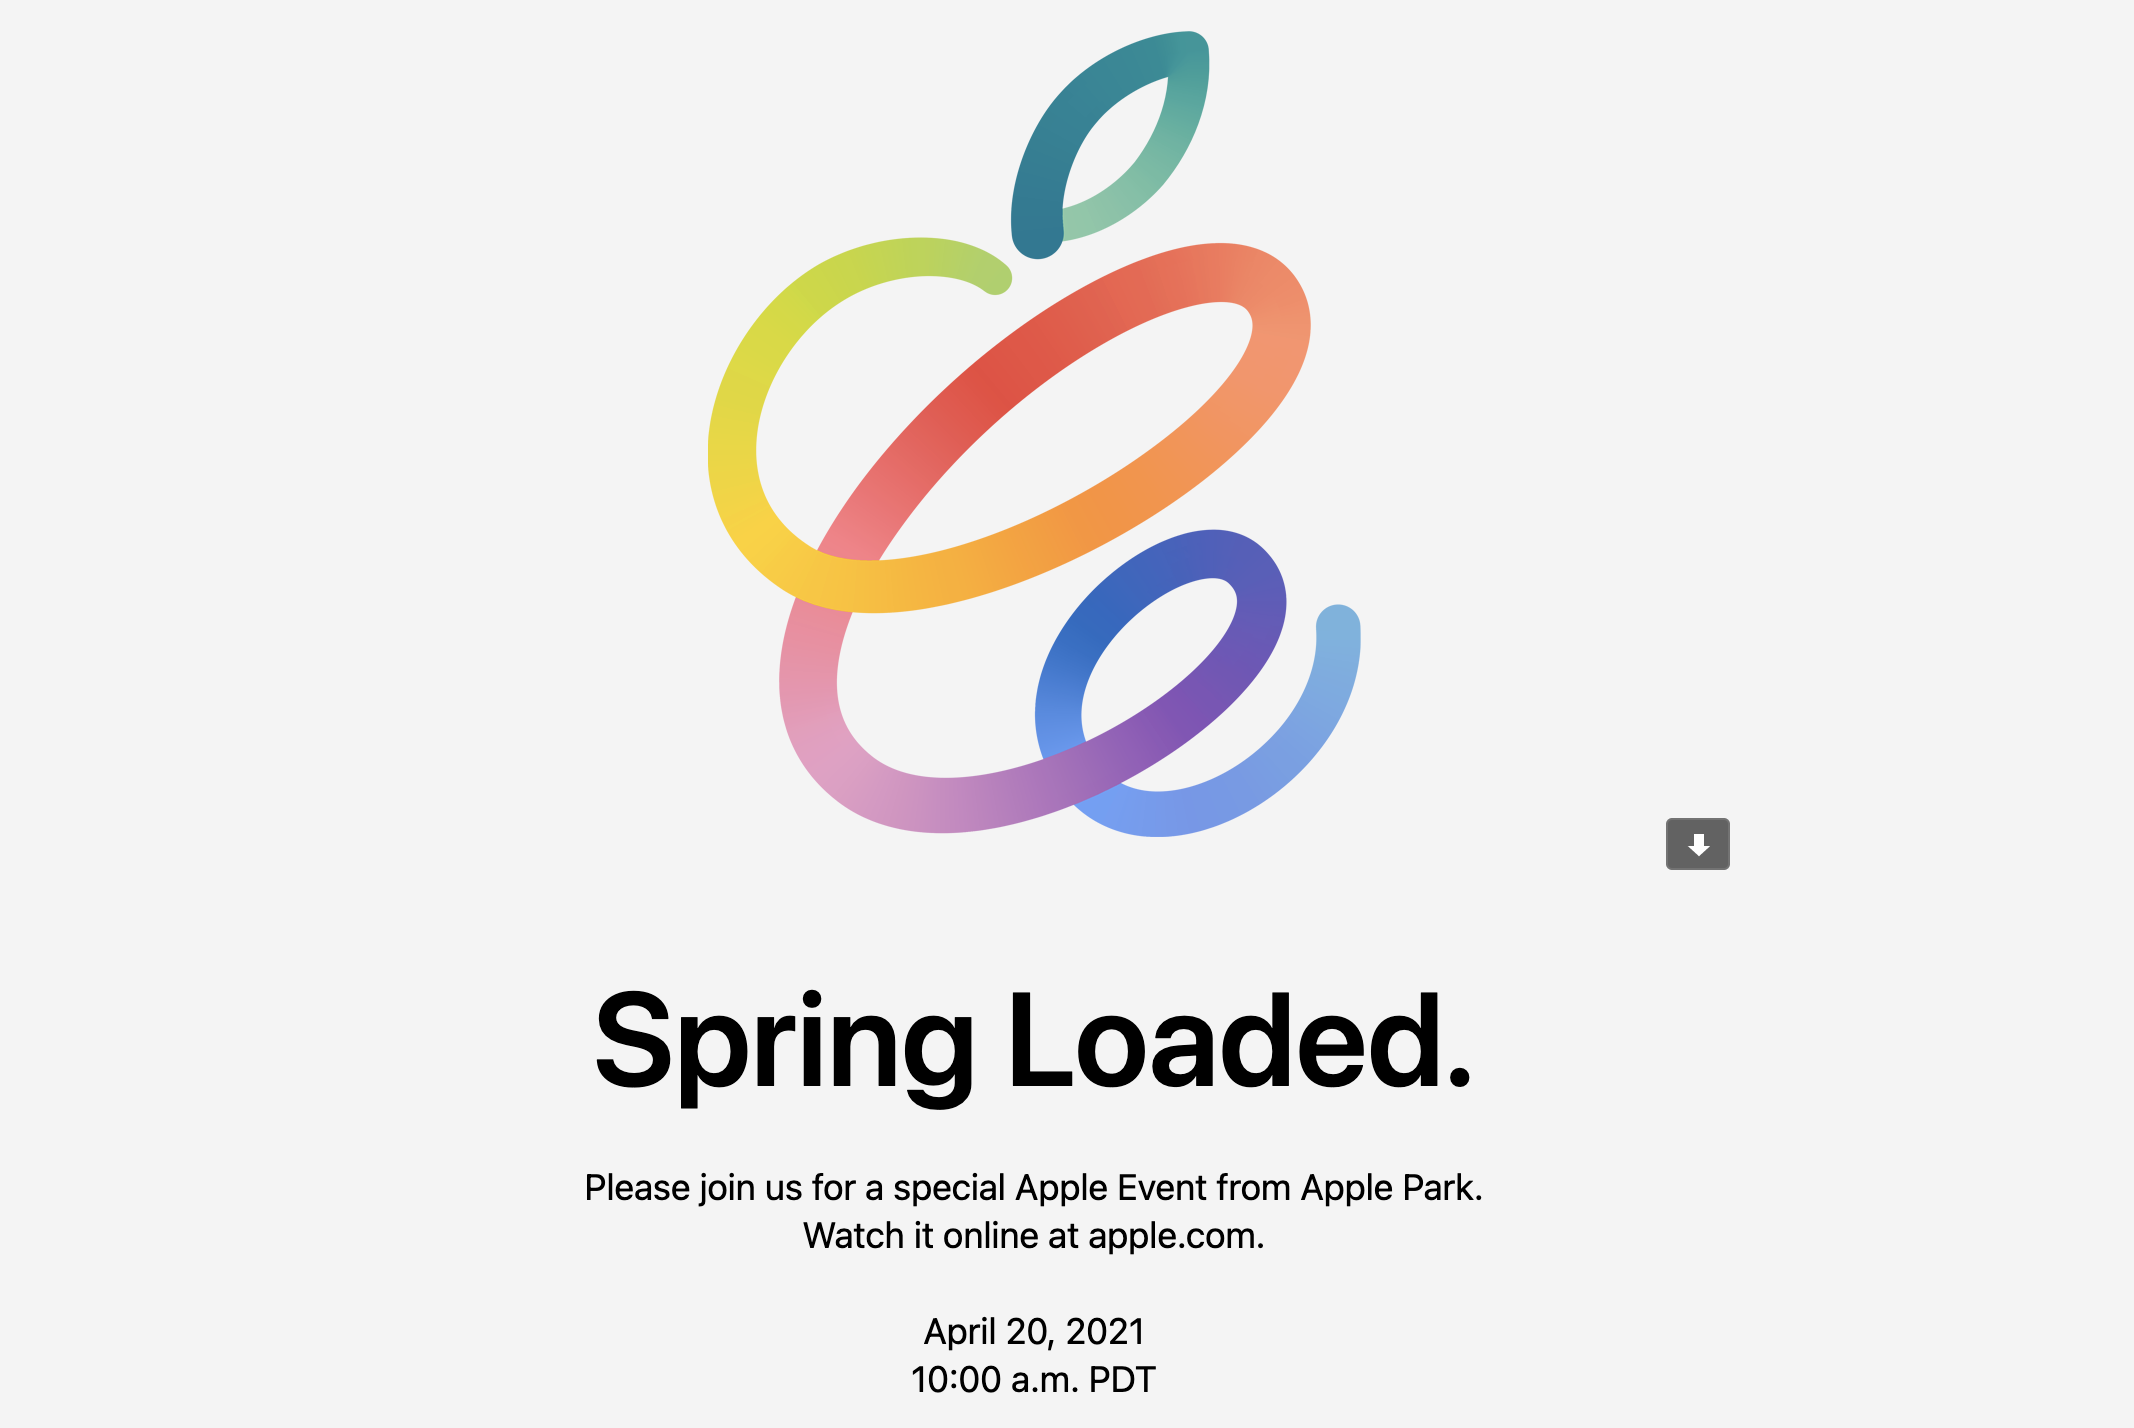 Apple confirms its launch on April 20, with iPads and Macs expected